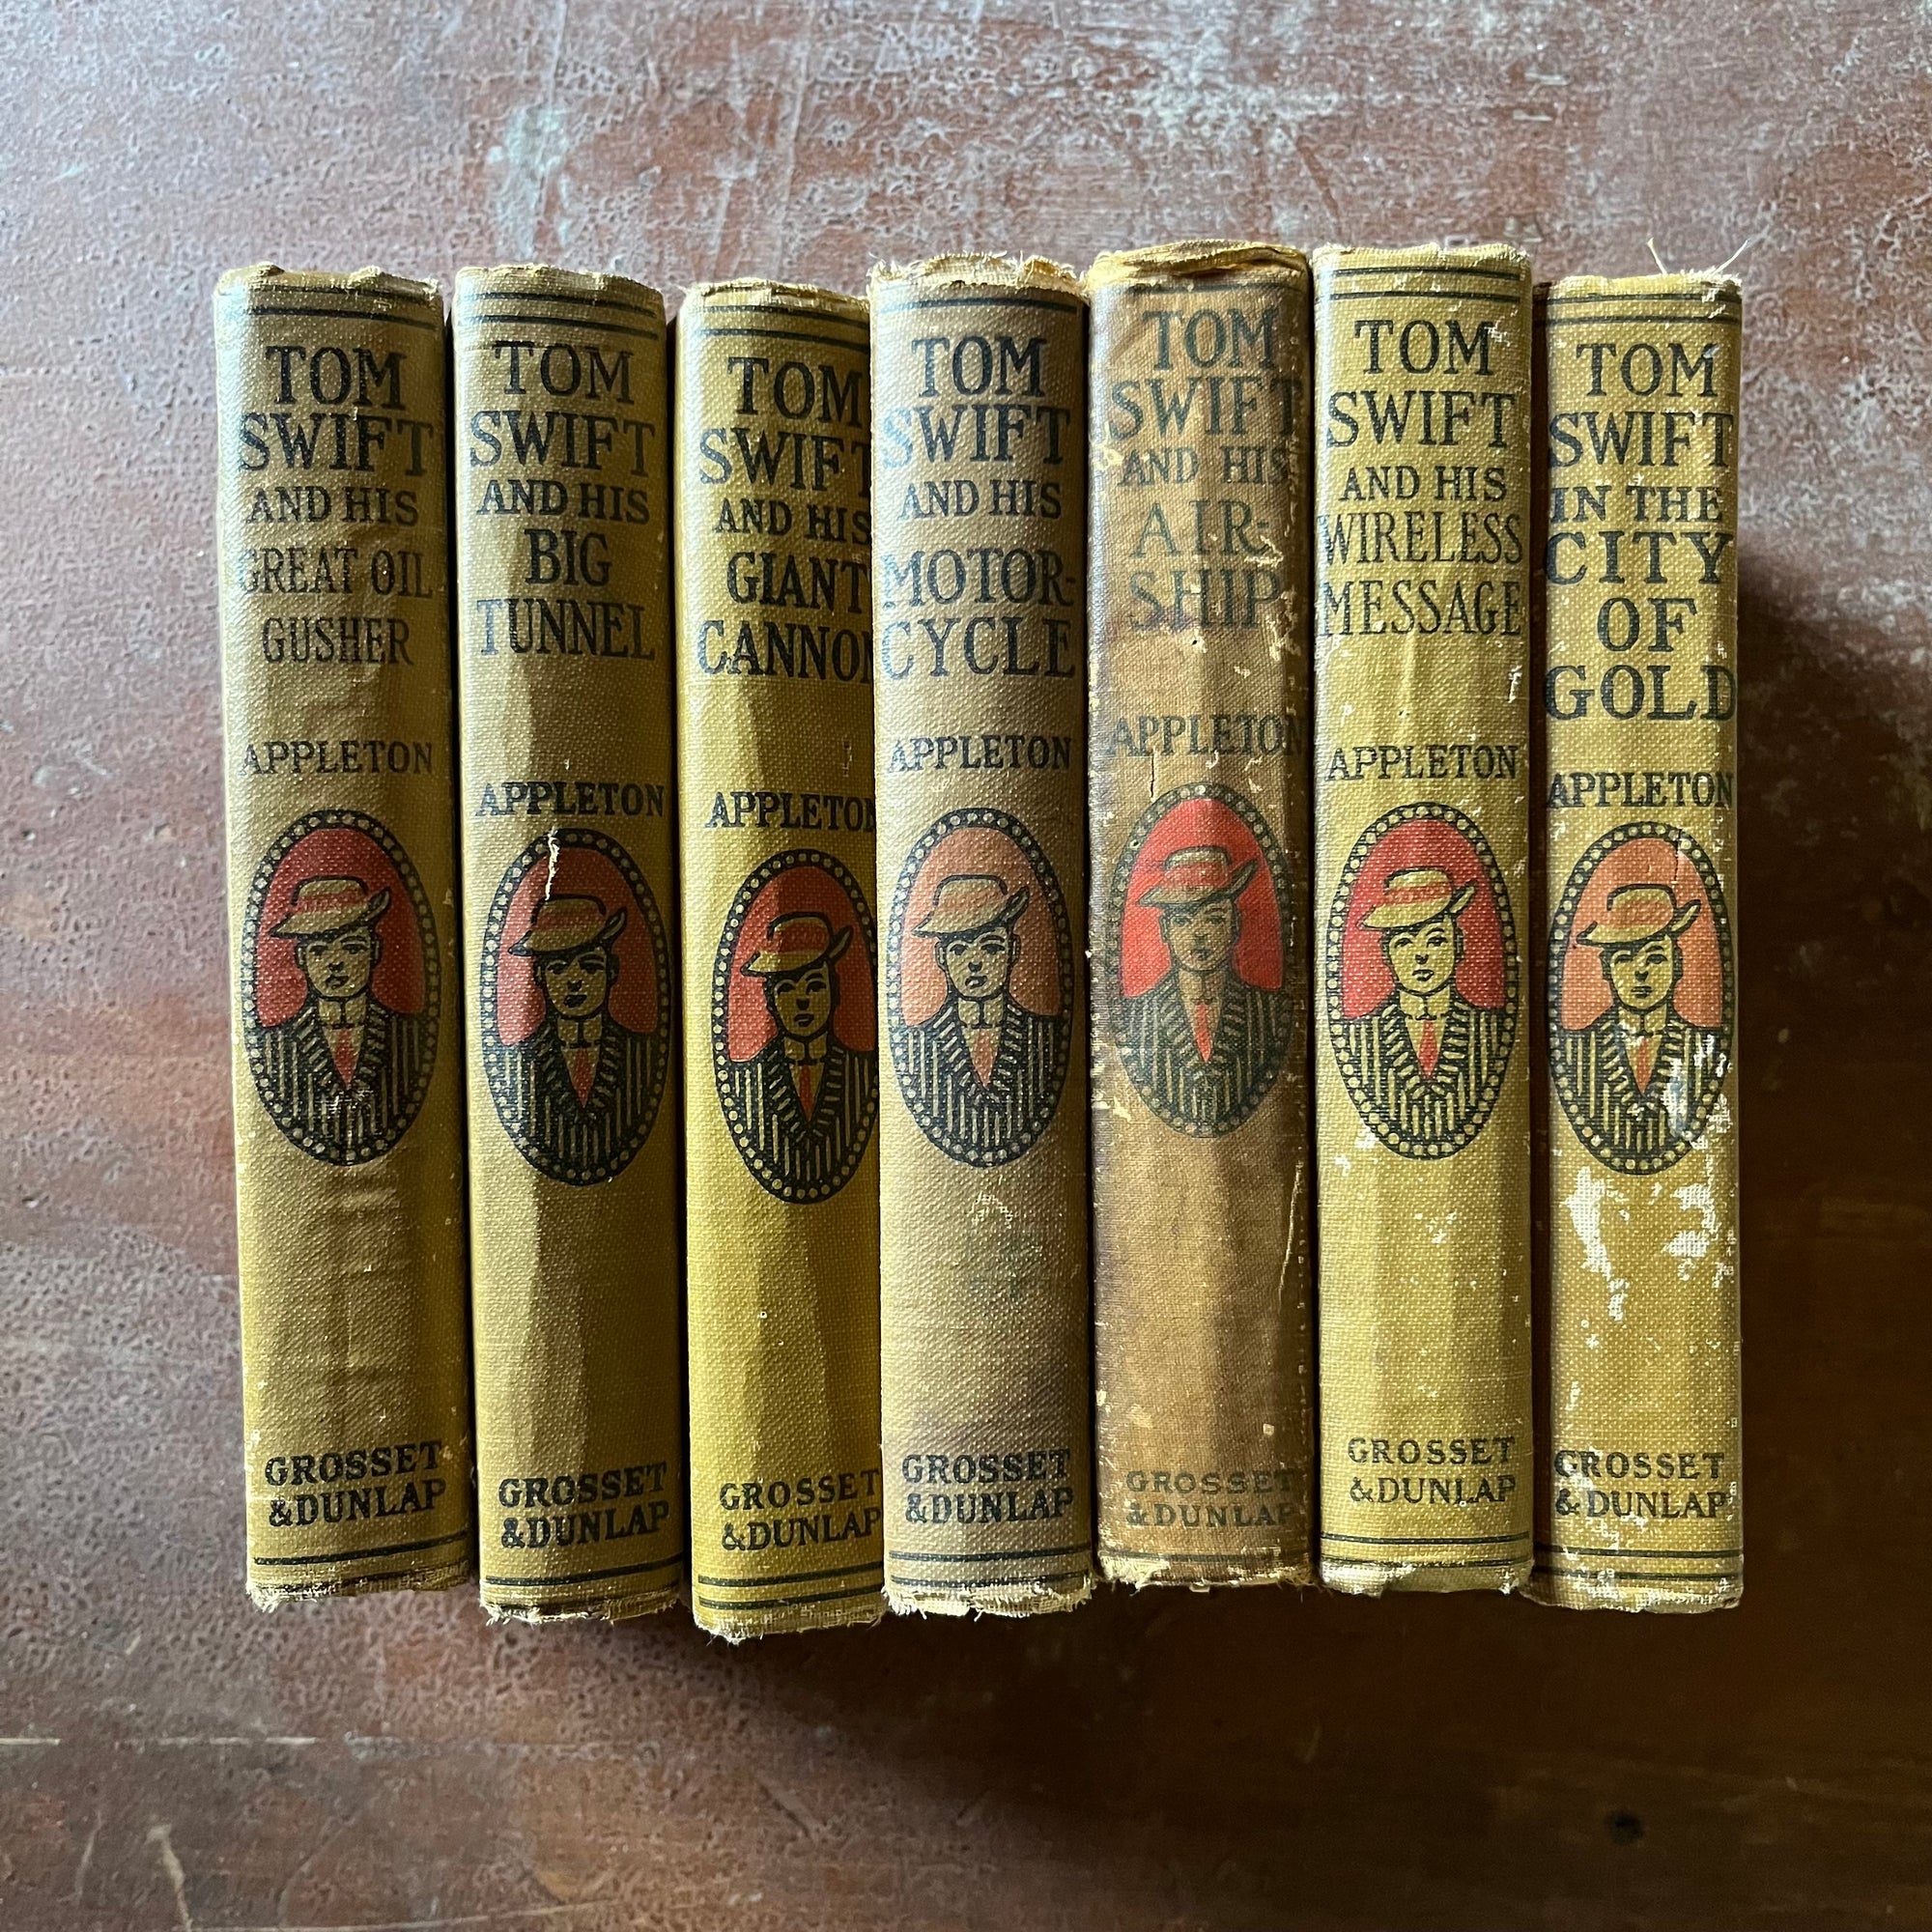 antique children's chapter books, adventure books for boys - Tom Swift Adventure Books Set of 7 written by Victor Appleton - view of the spines with Tom Swift's illustration in the middle with the title & author last name above & publisher below